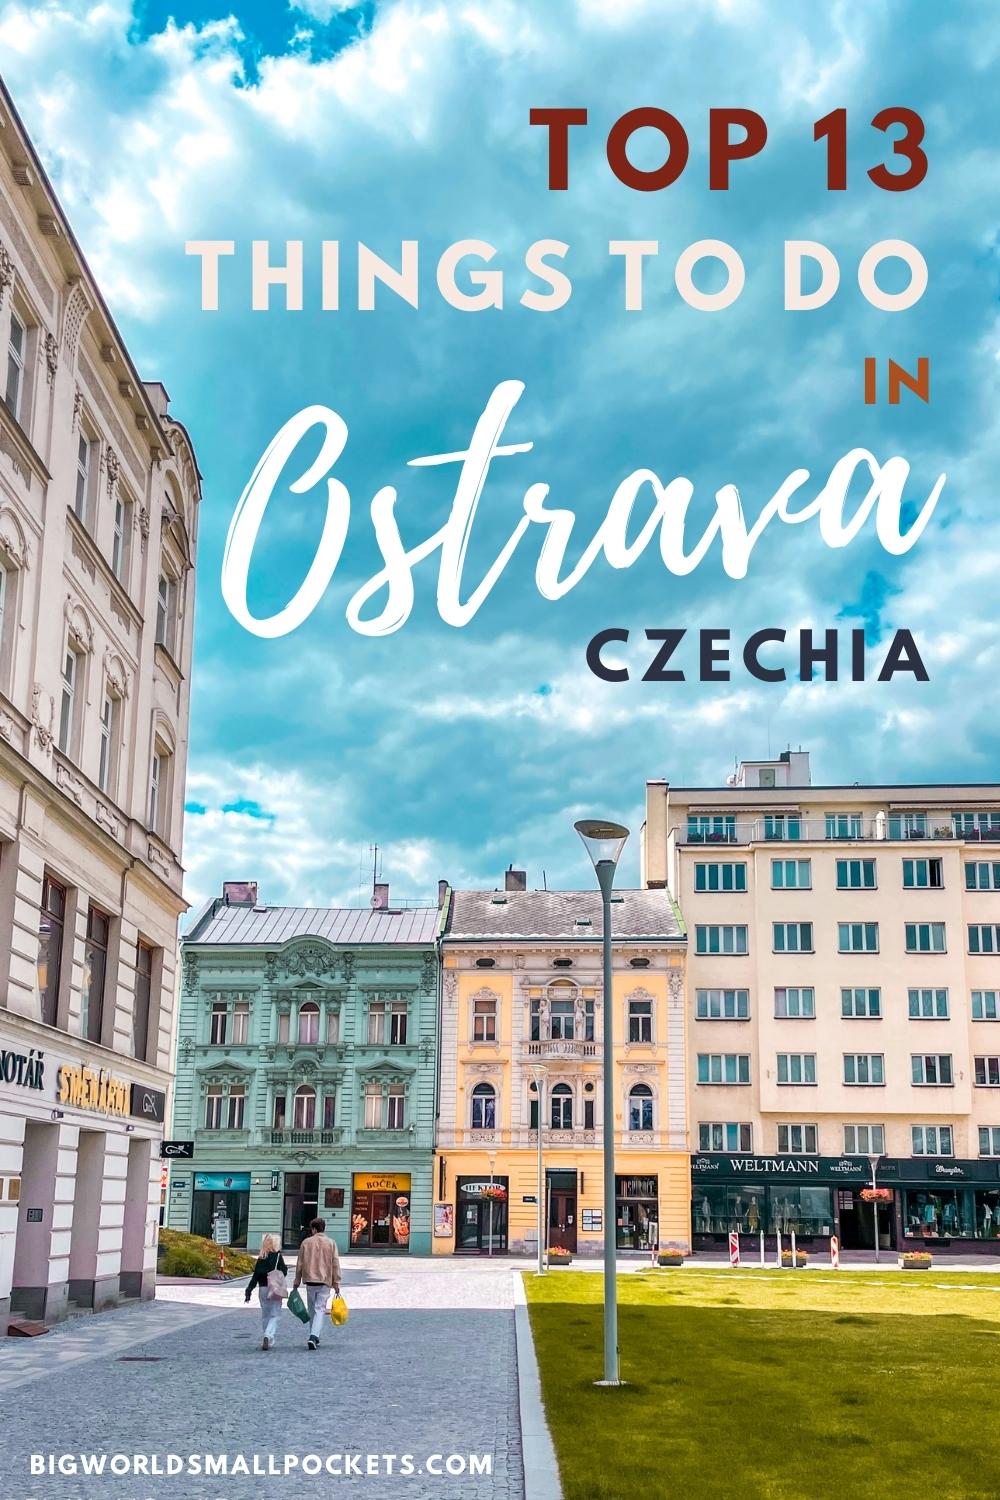 13 Best Things to Do in Ostrava, Czechia